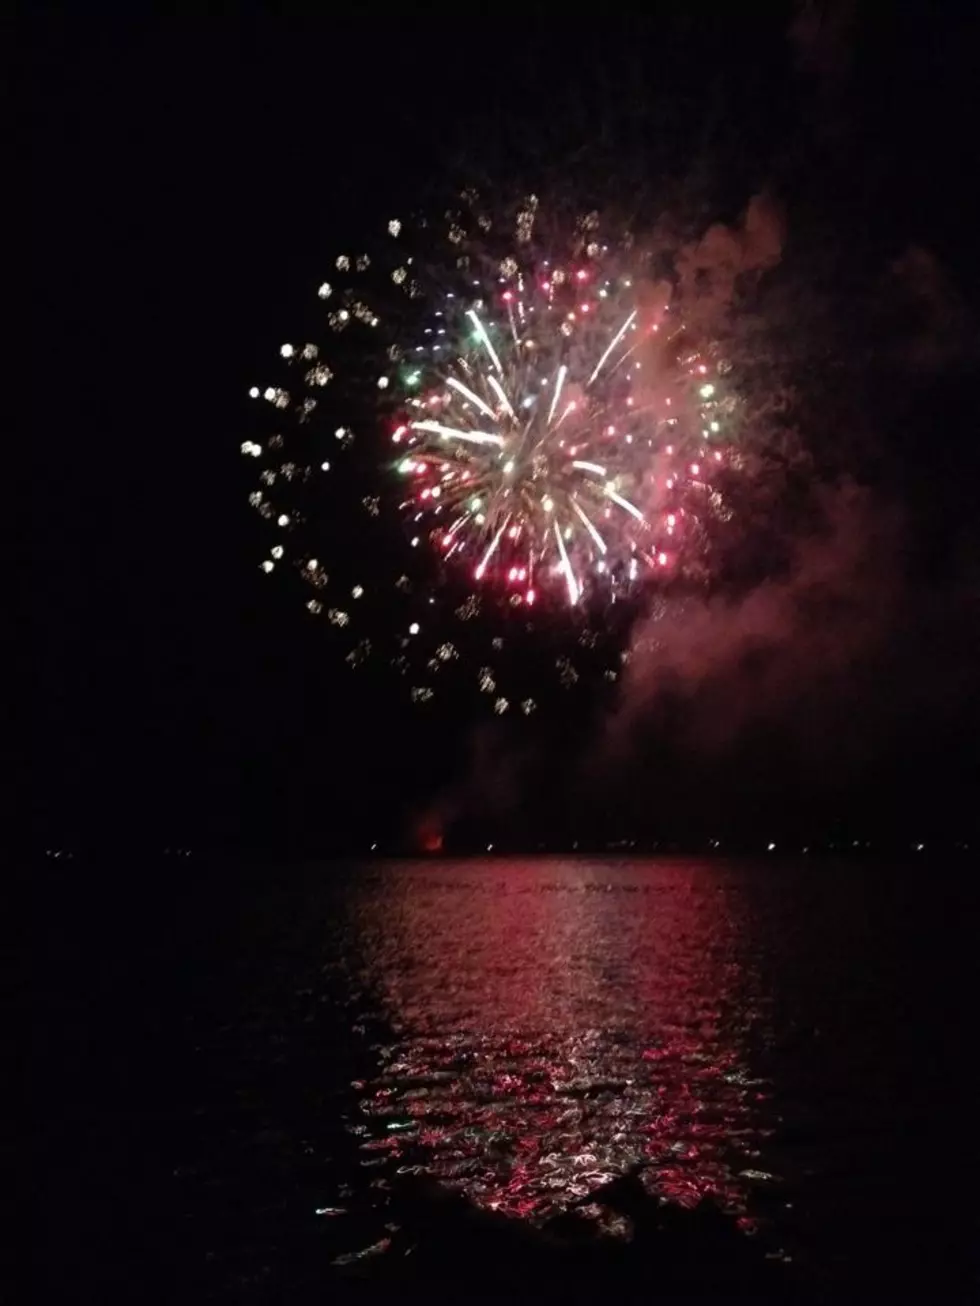 Canadarago Lake to Host Fireworks Display July 4th